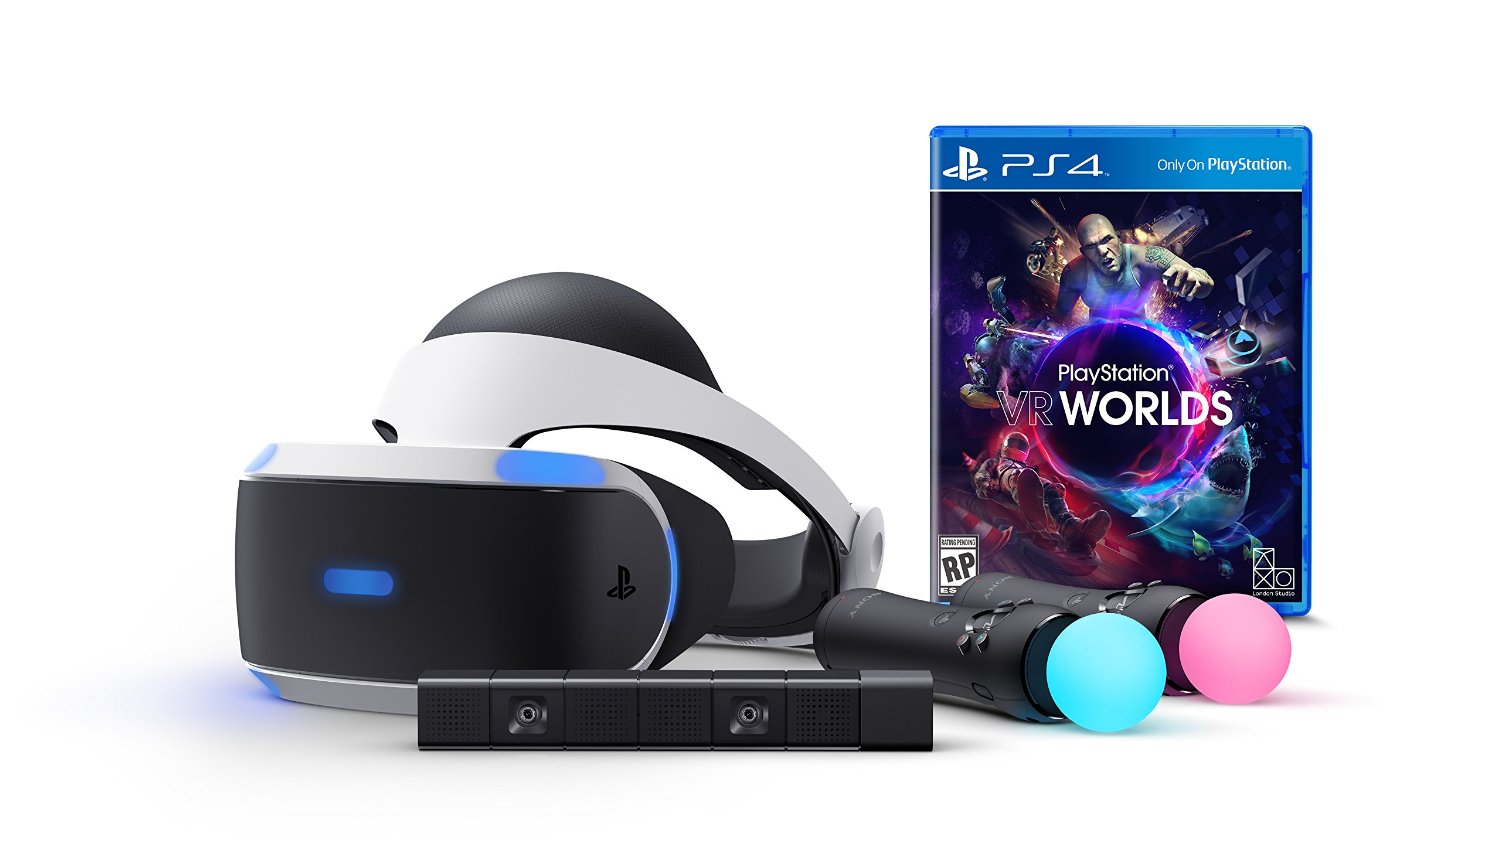 Who Has Playstation Vr In Stock